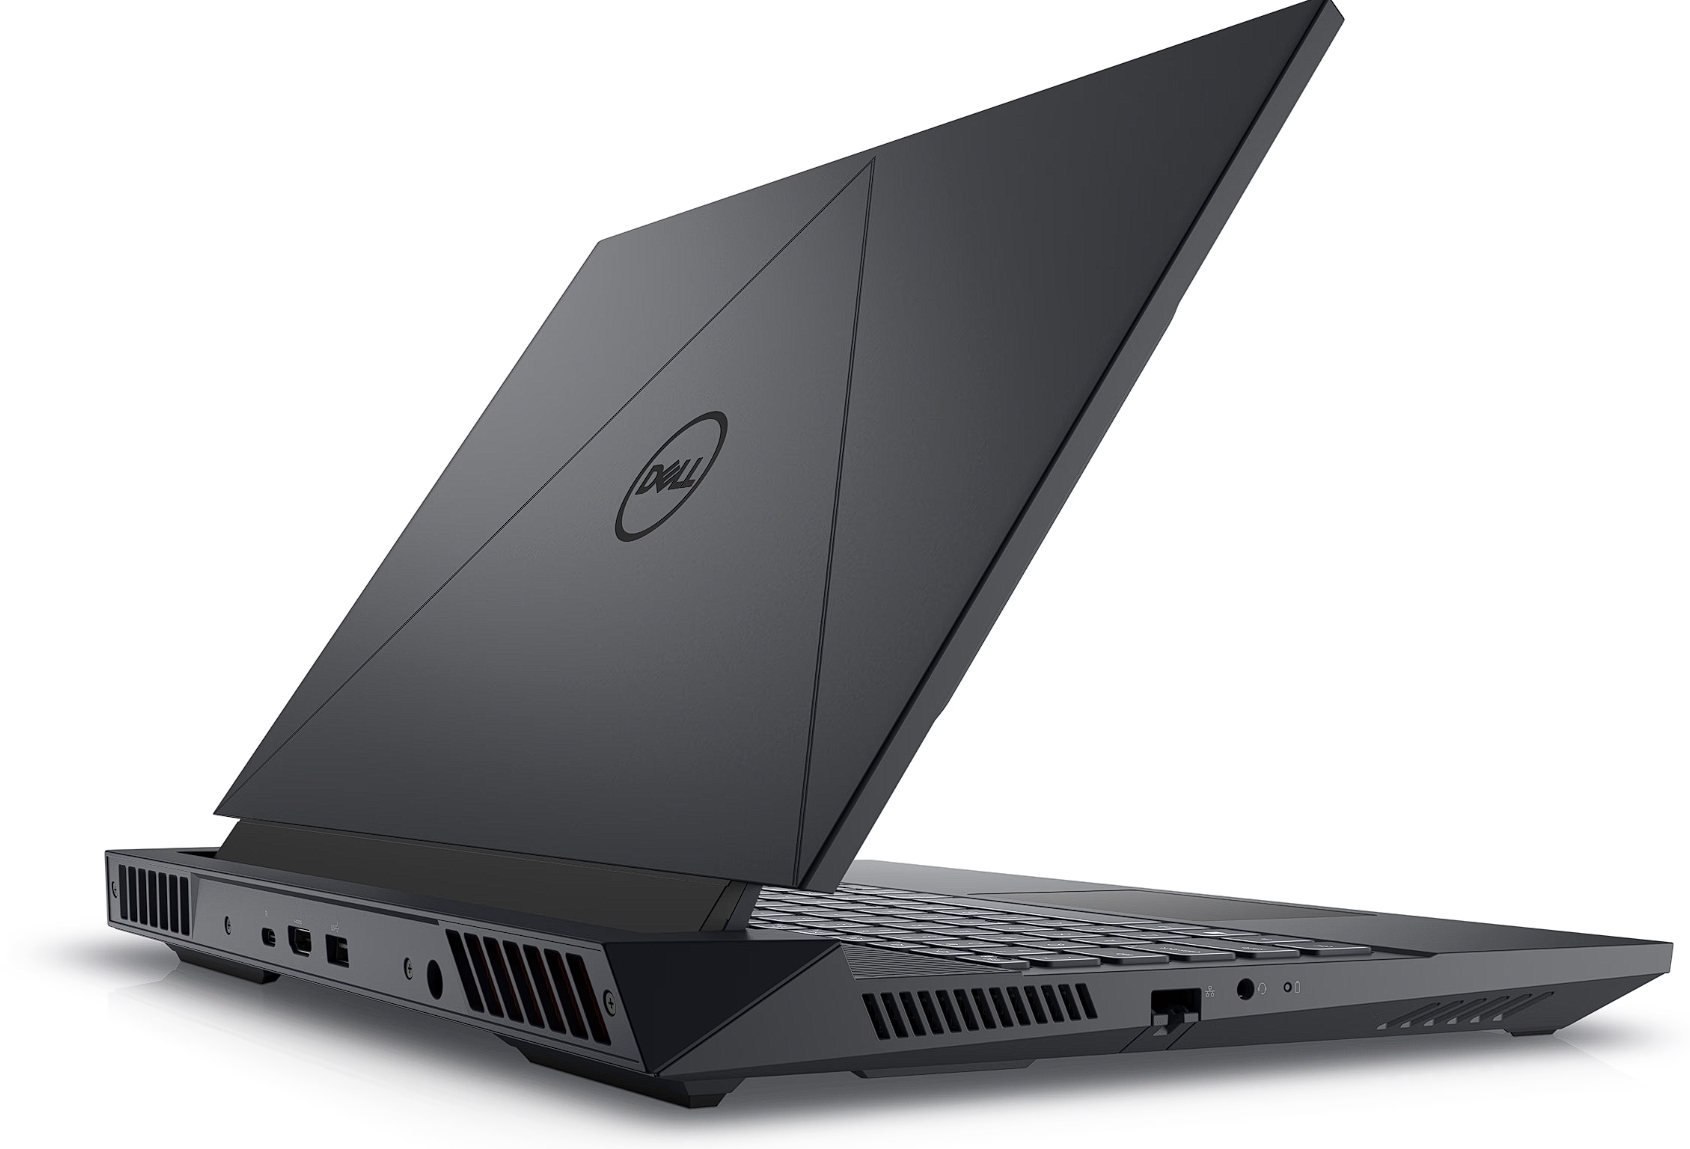 dell vs hp laptops which is better